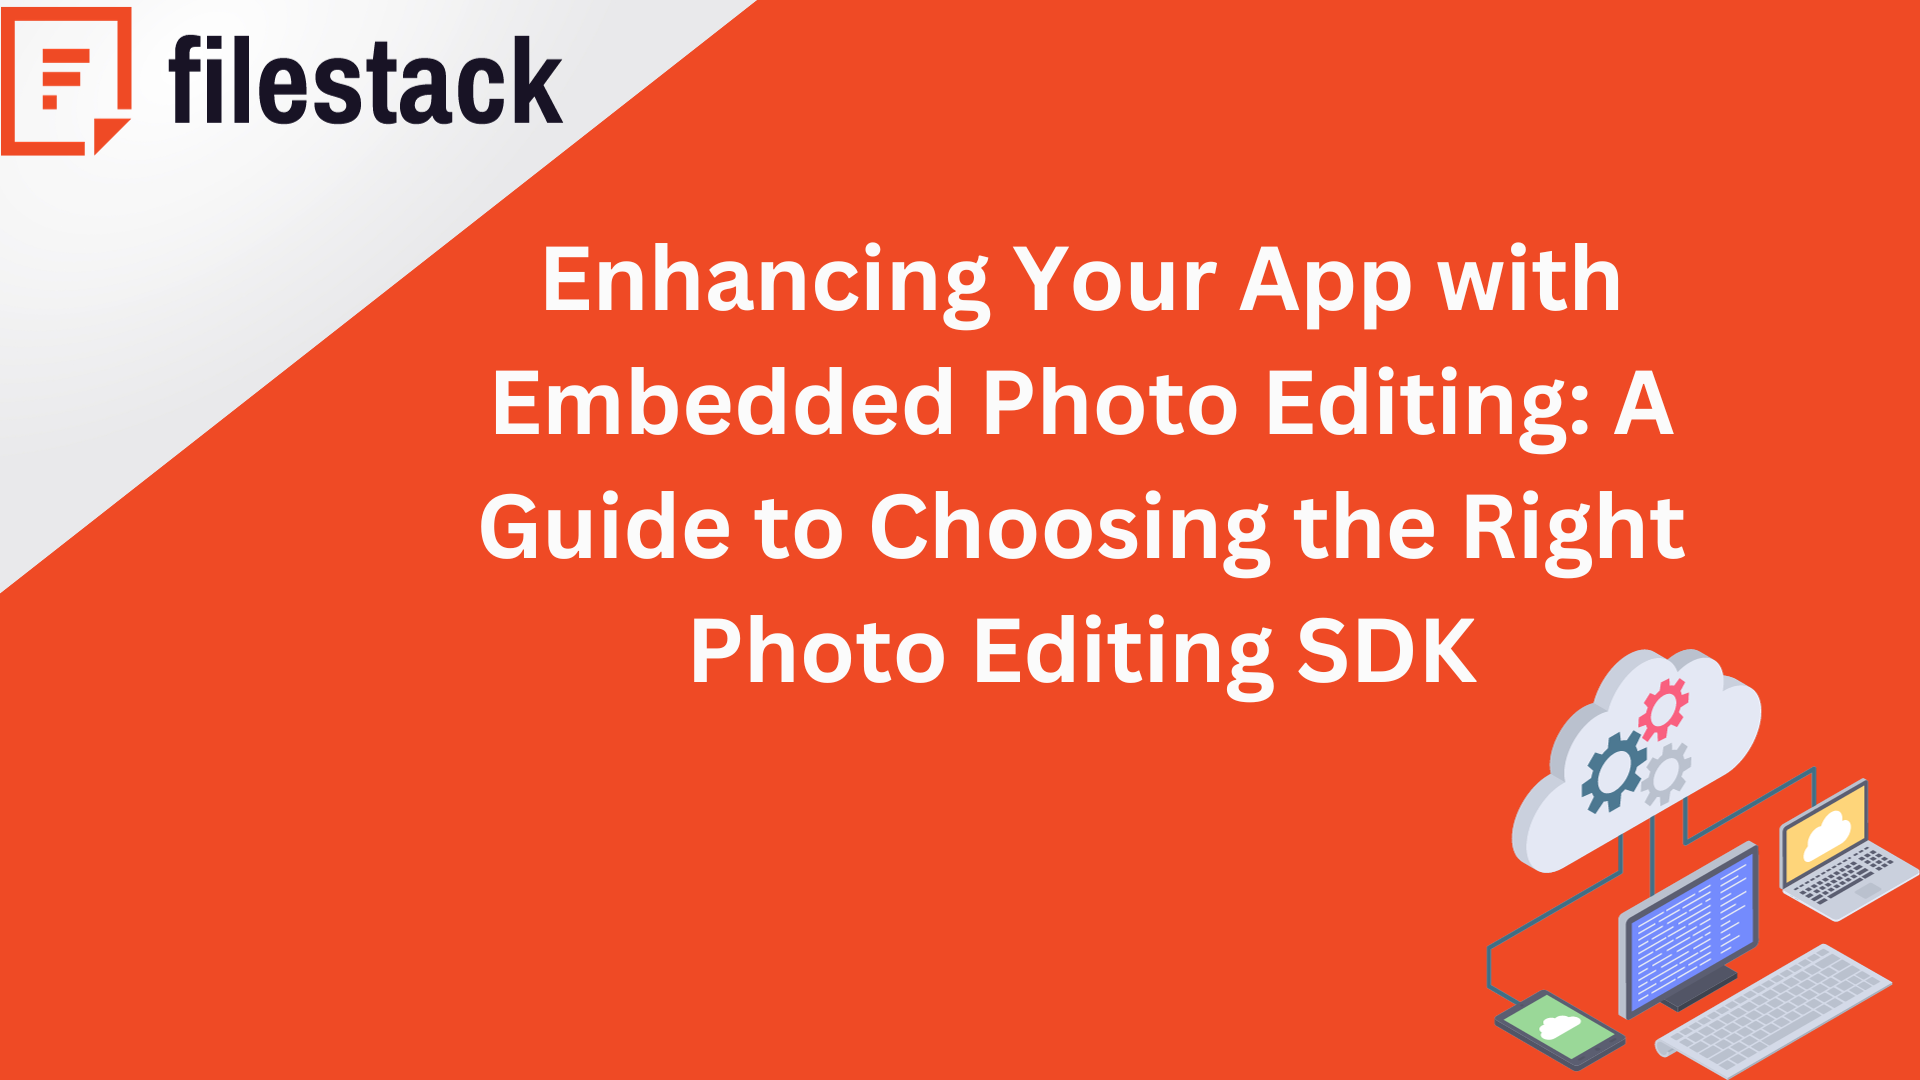 Enhancing Your App with Embedded Photo Editing: A Guide to Choosing the Right Photo Editing SDK